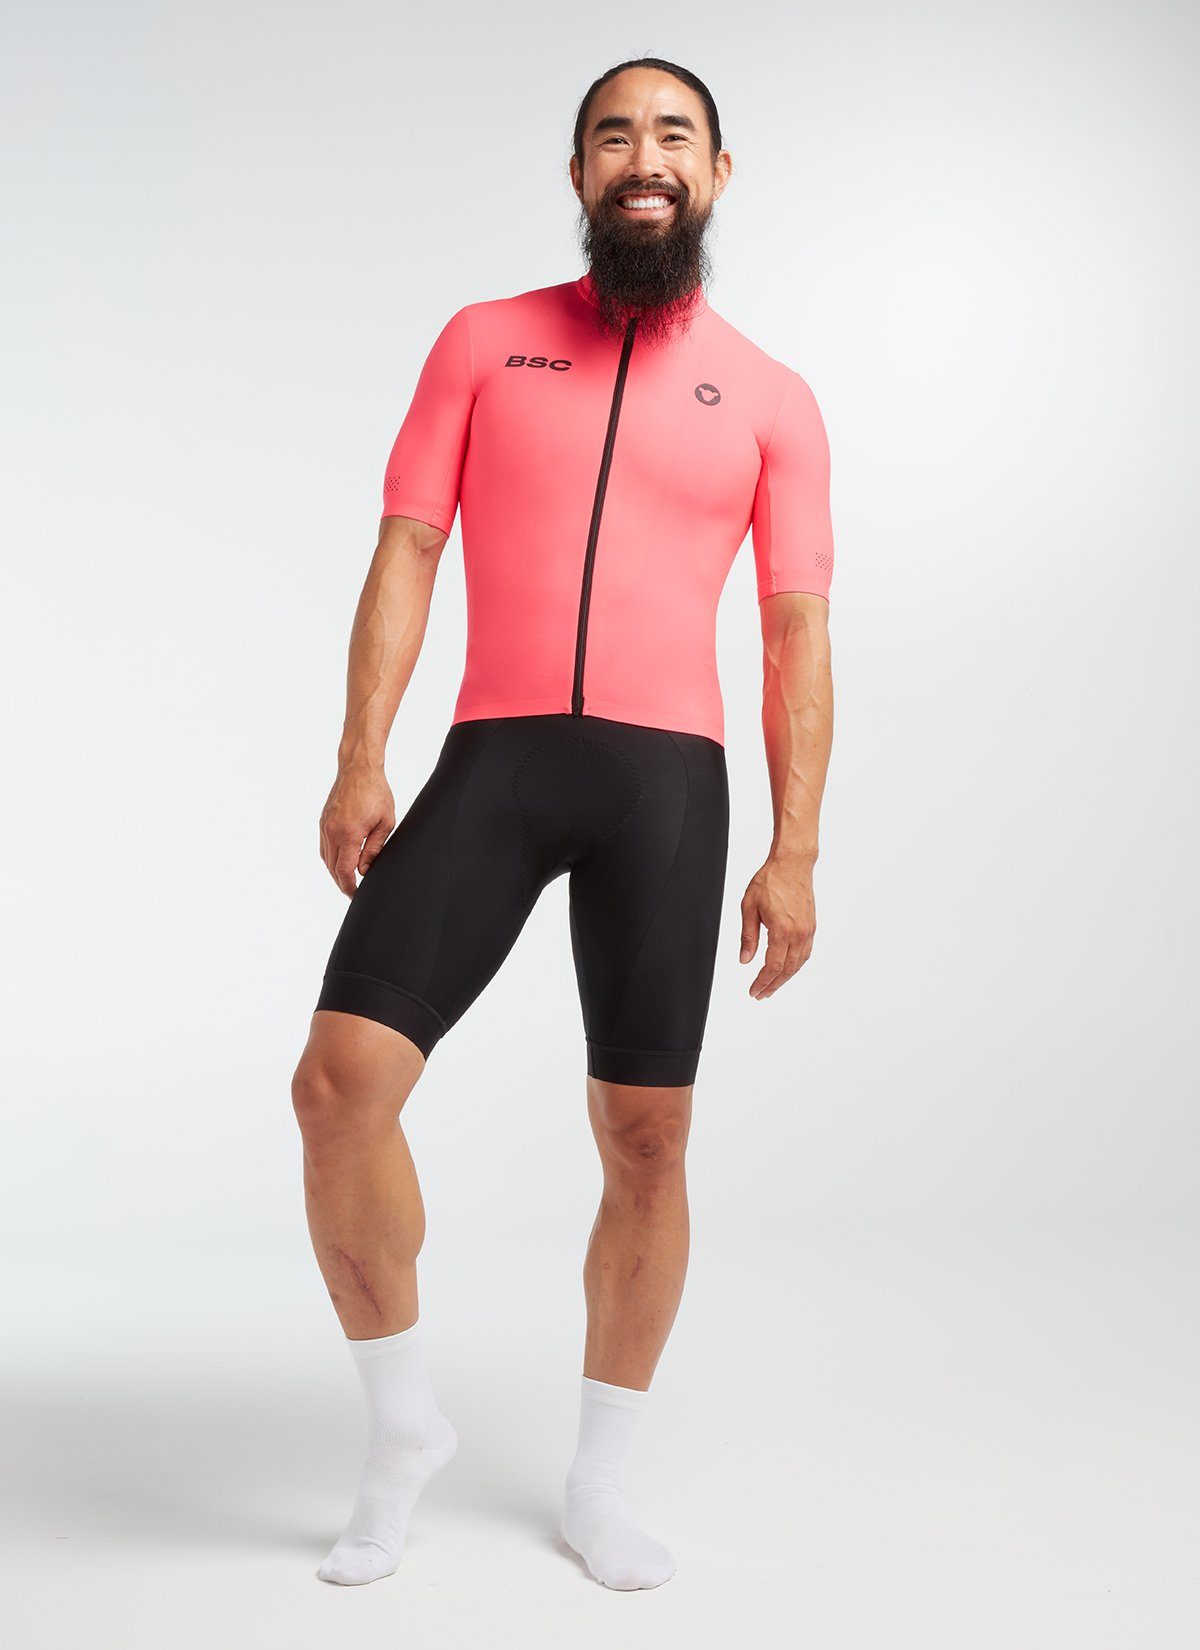 Men's Elements SS Thermal Jersey - Neon Pink